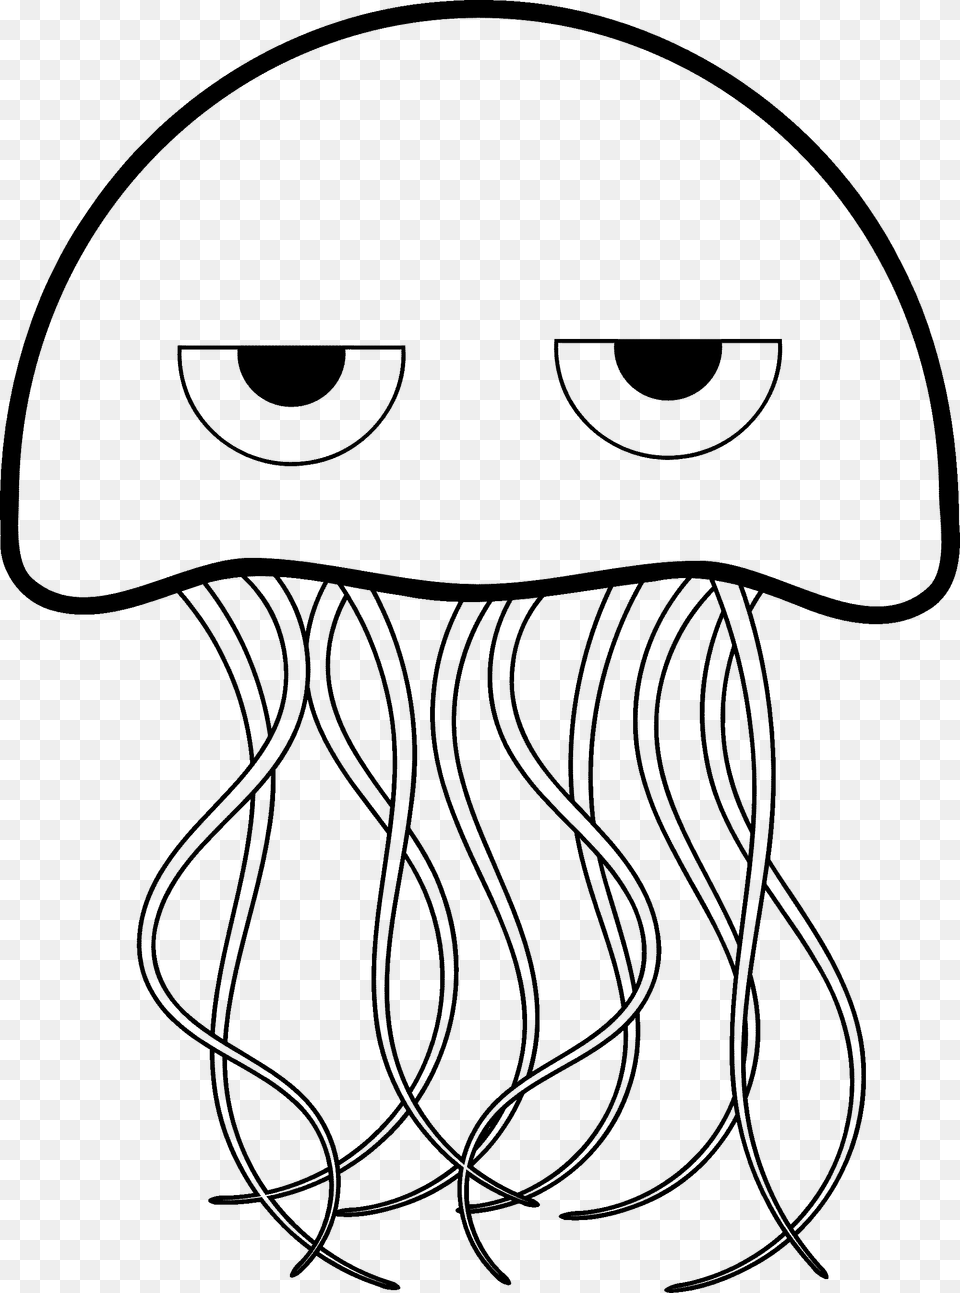 Jelly Fish Drawing At Getdrawings Jellyfish Black And White Clip Art, Animal, Sea Life, Invertebrate, Smoke Pipe Free Png